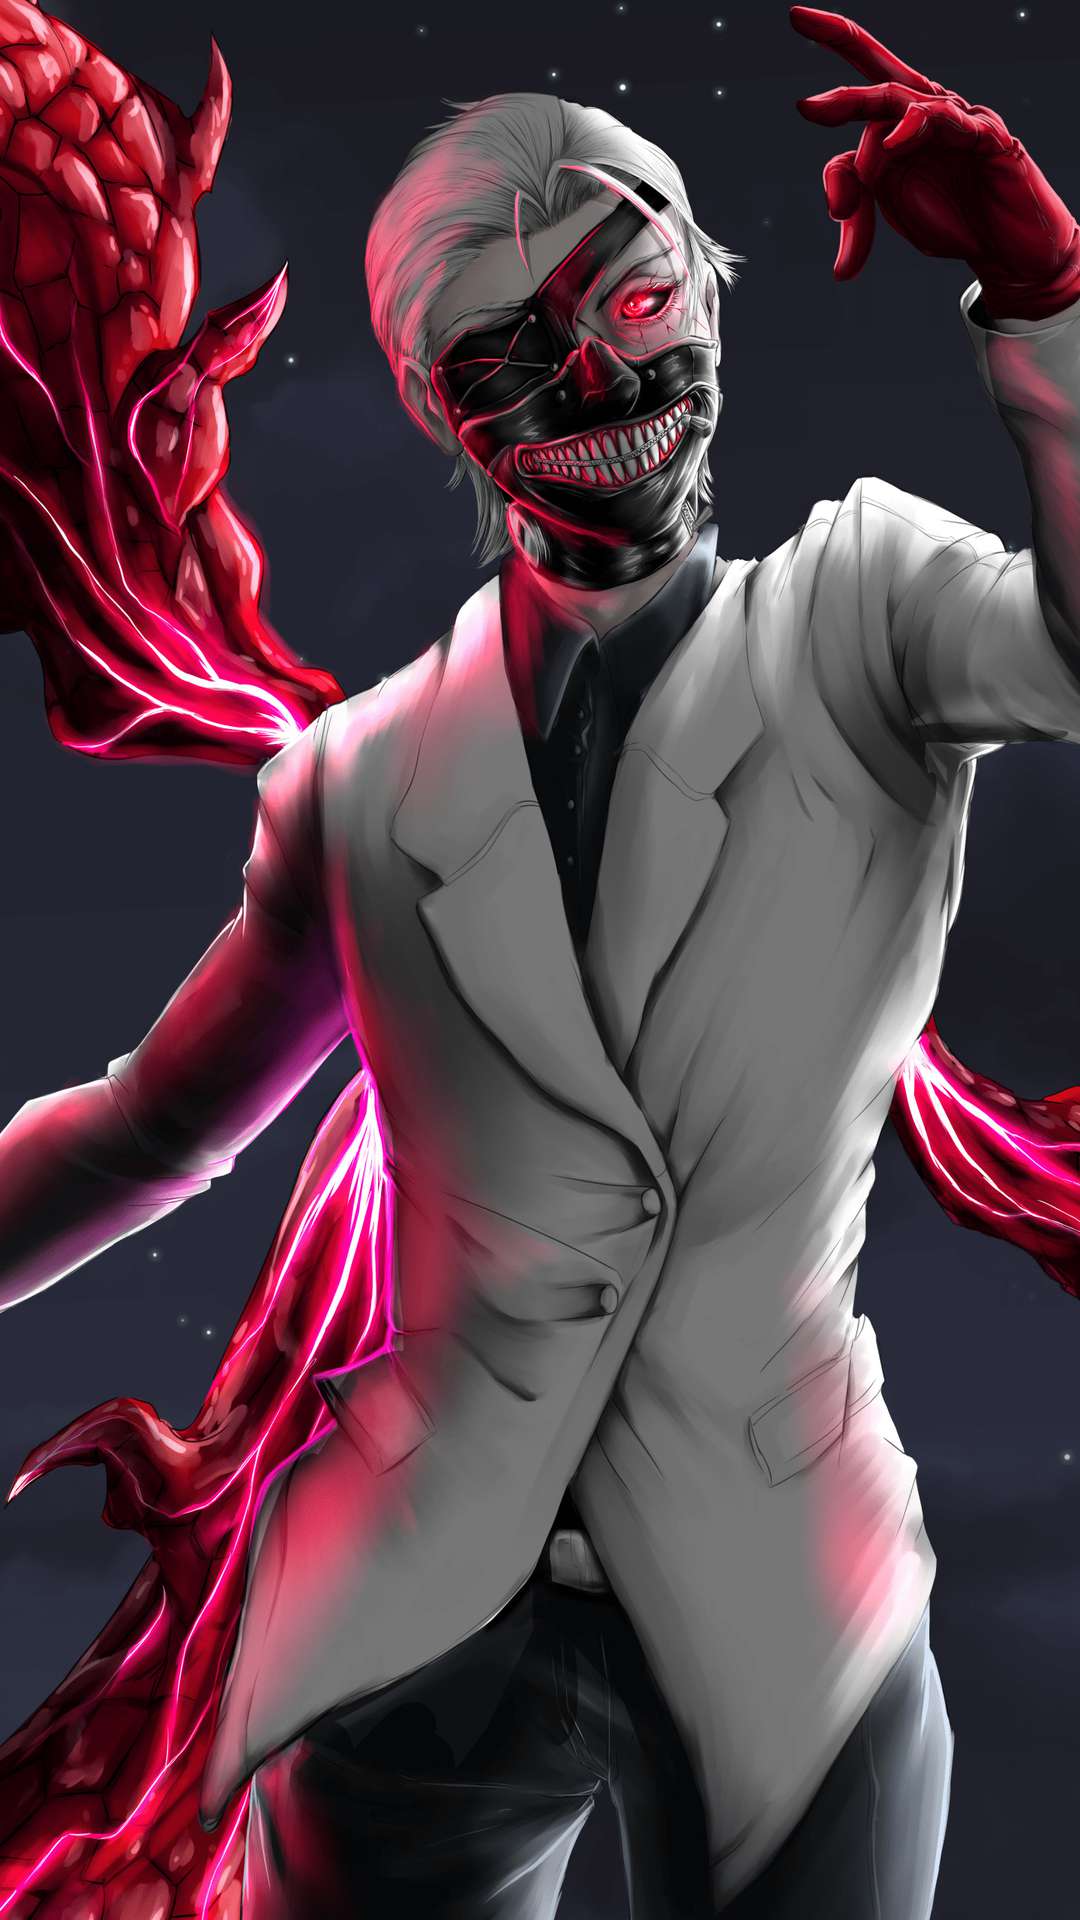 106+ Kaneki Ken Wallpapers for iPhone and Android by Elijah Flores